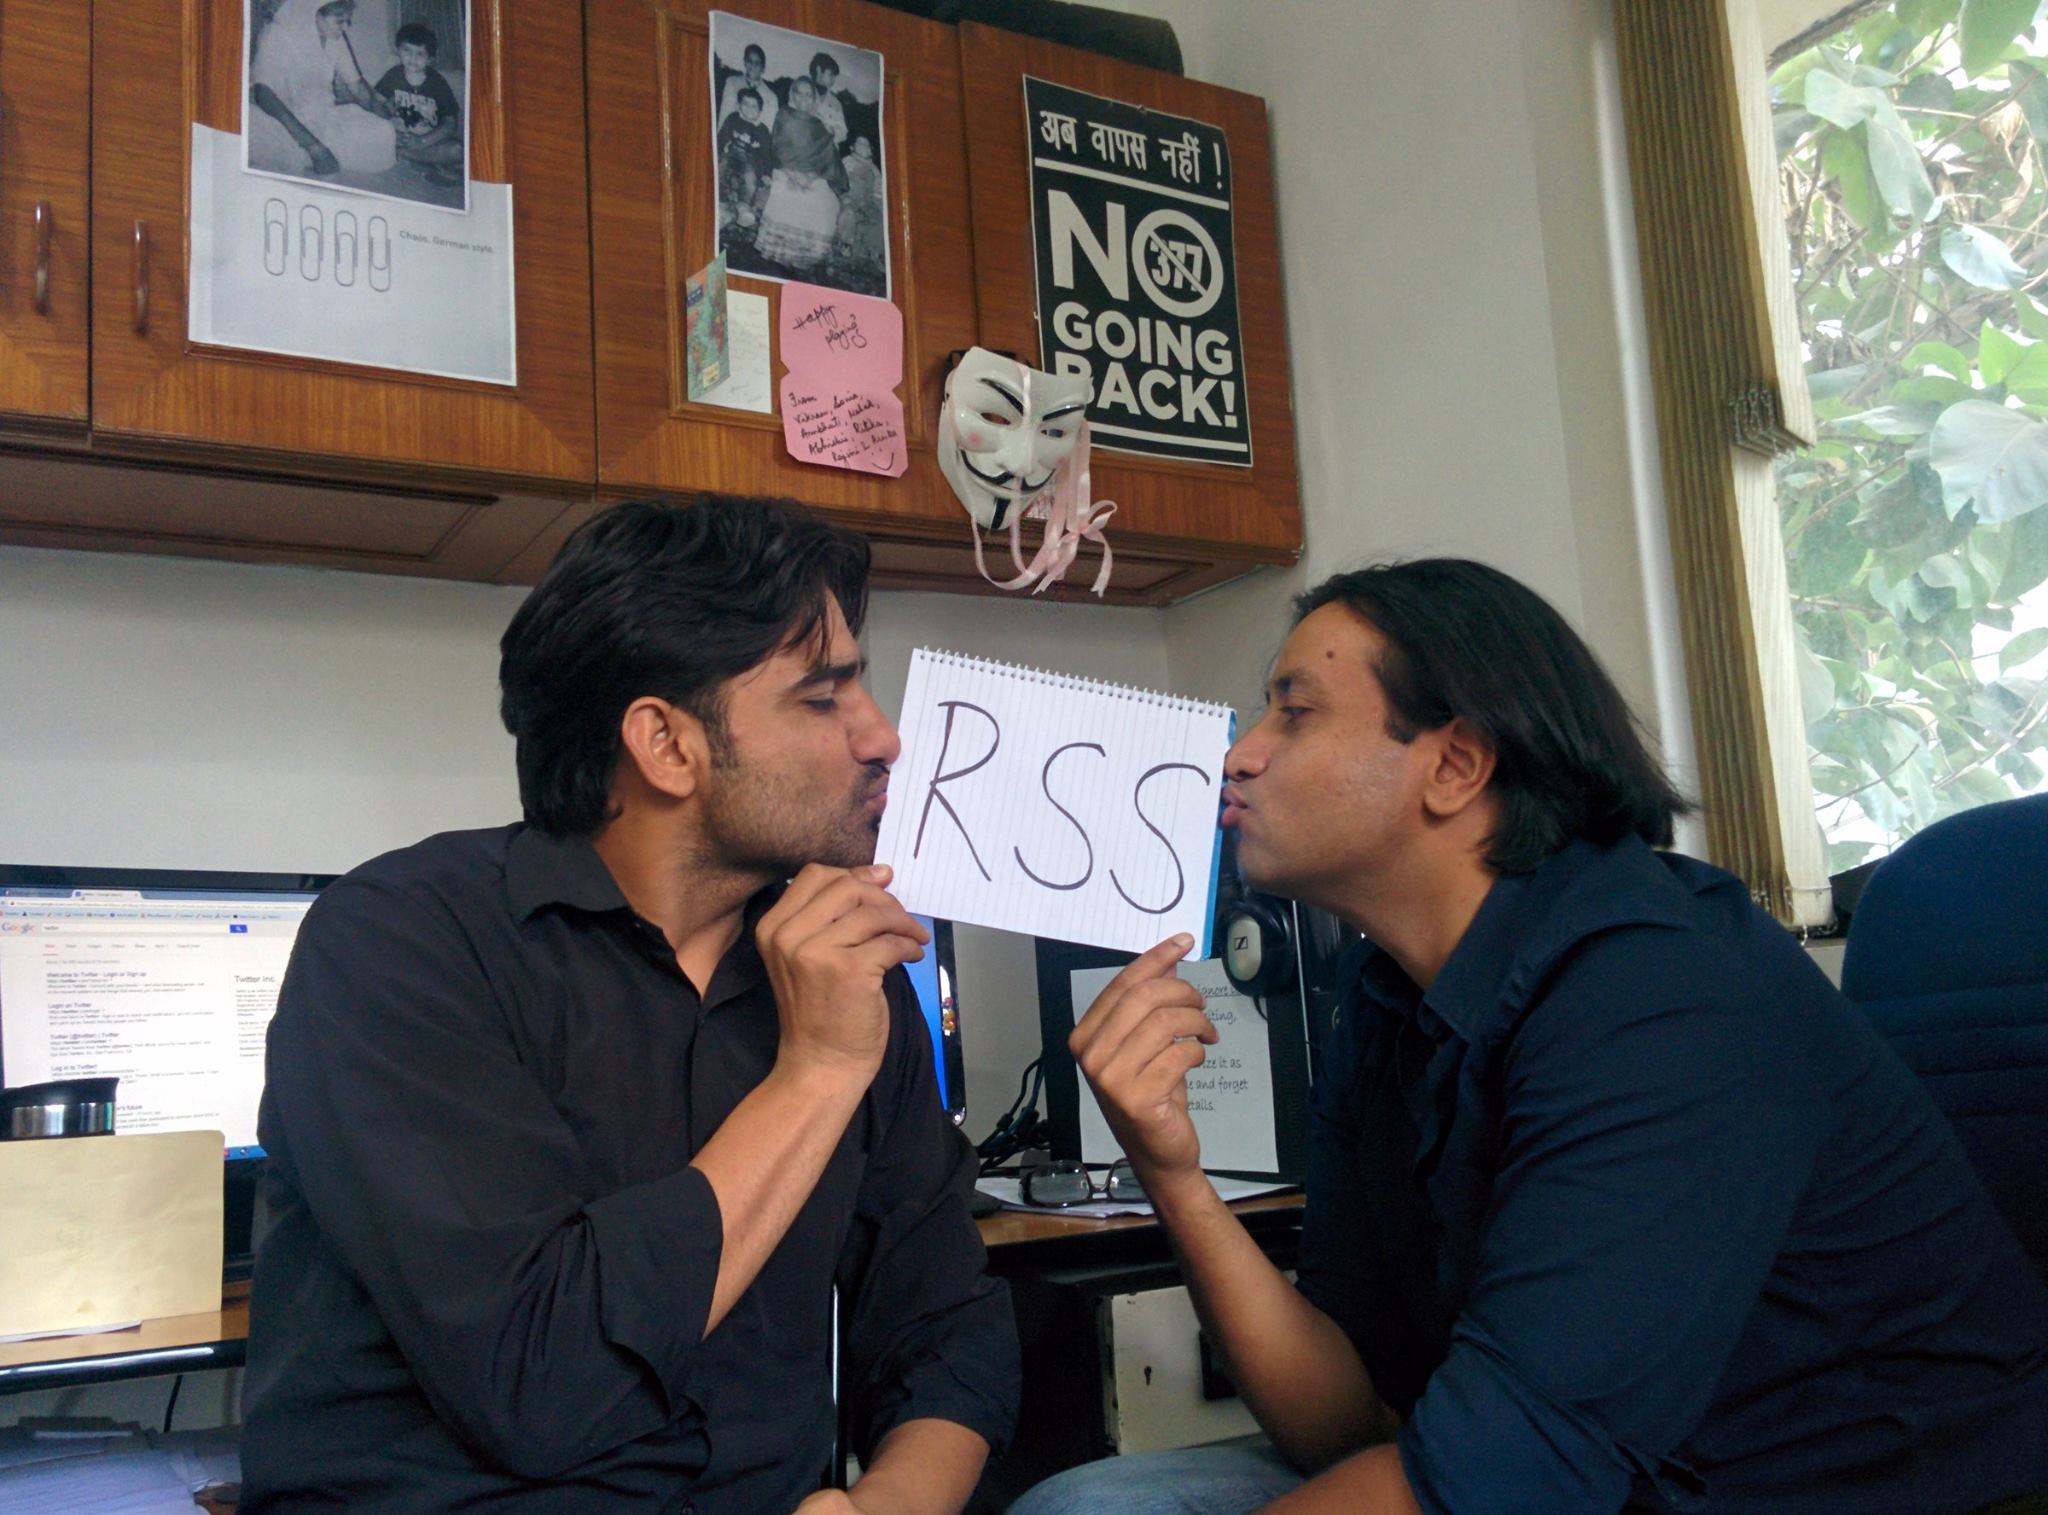 'MAN'ly love for RSS